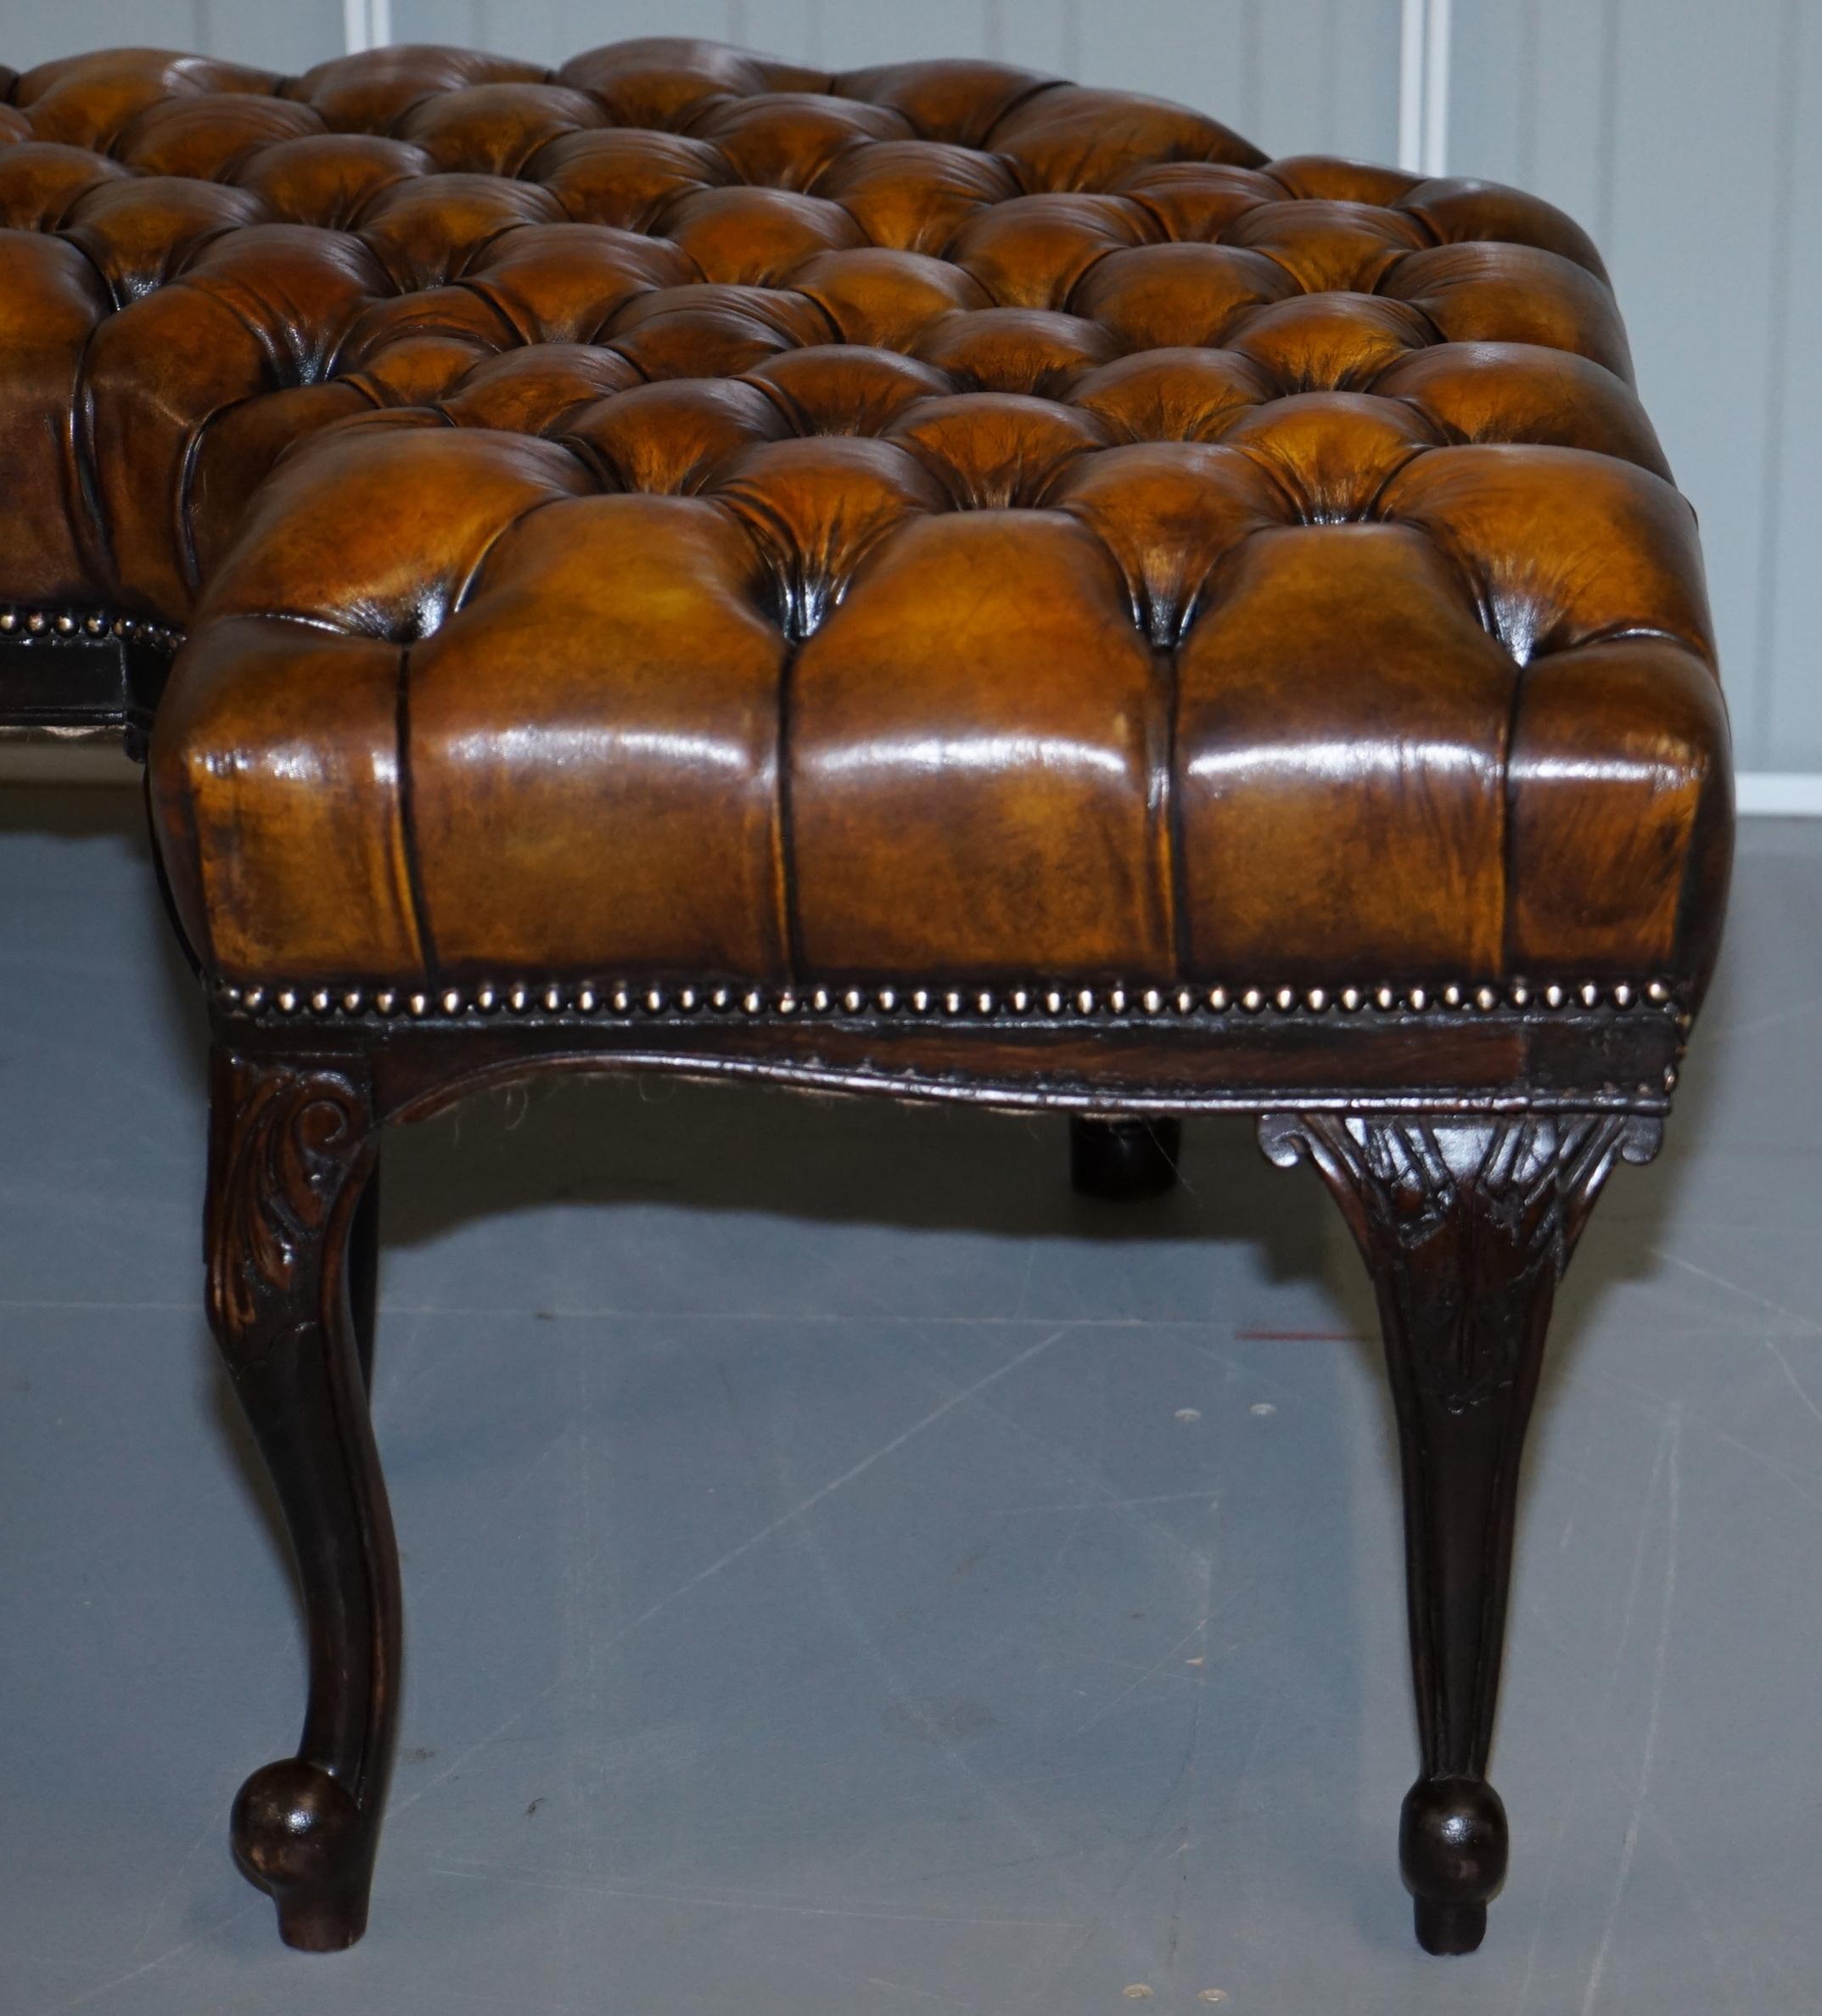 19th Century Fully Restored Victorian Chesterfield Brown Leather Corner Bench Stool Seat